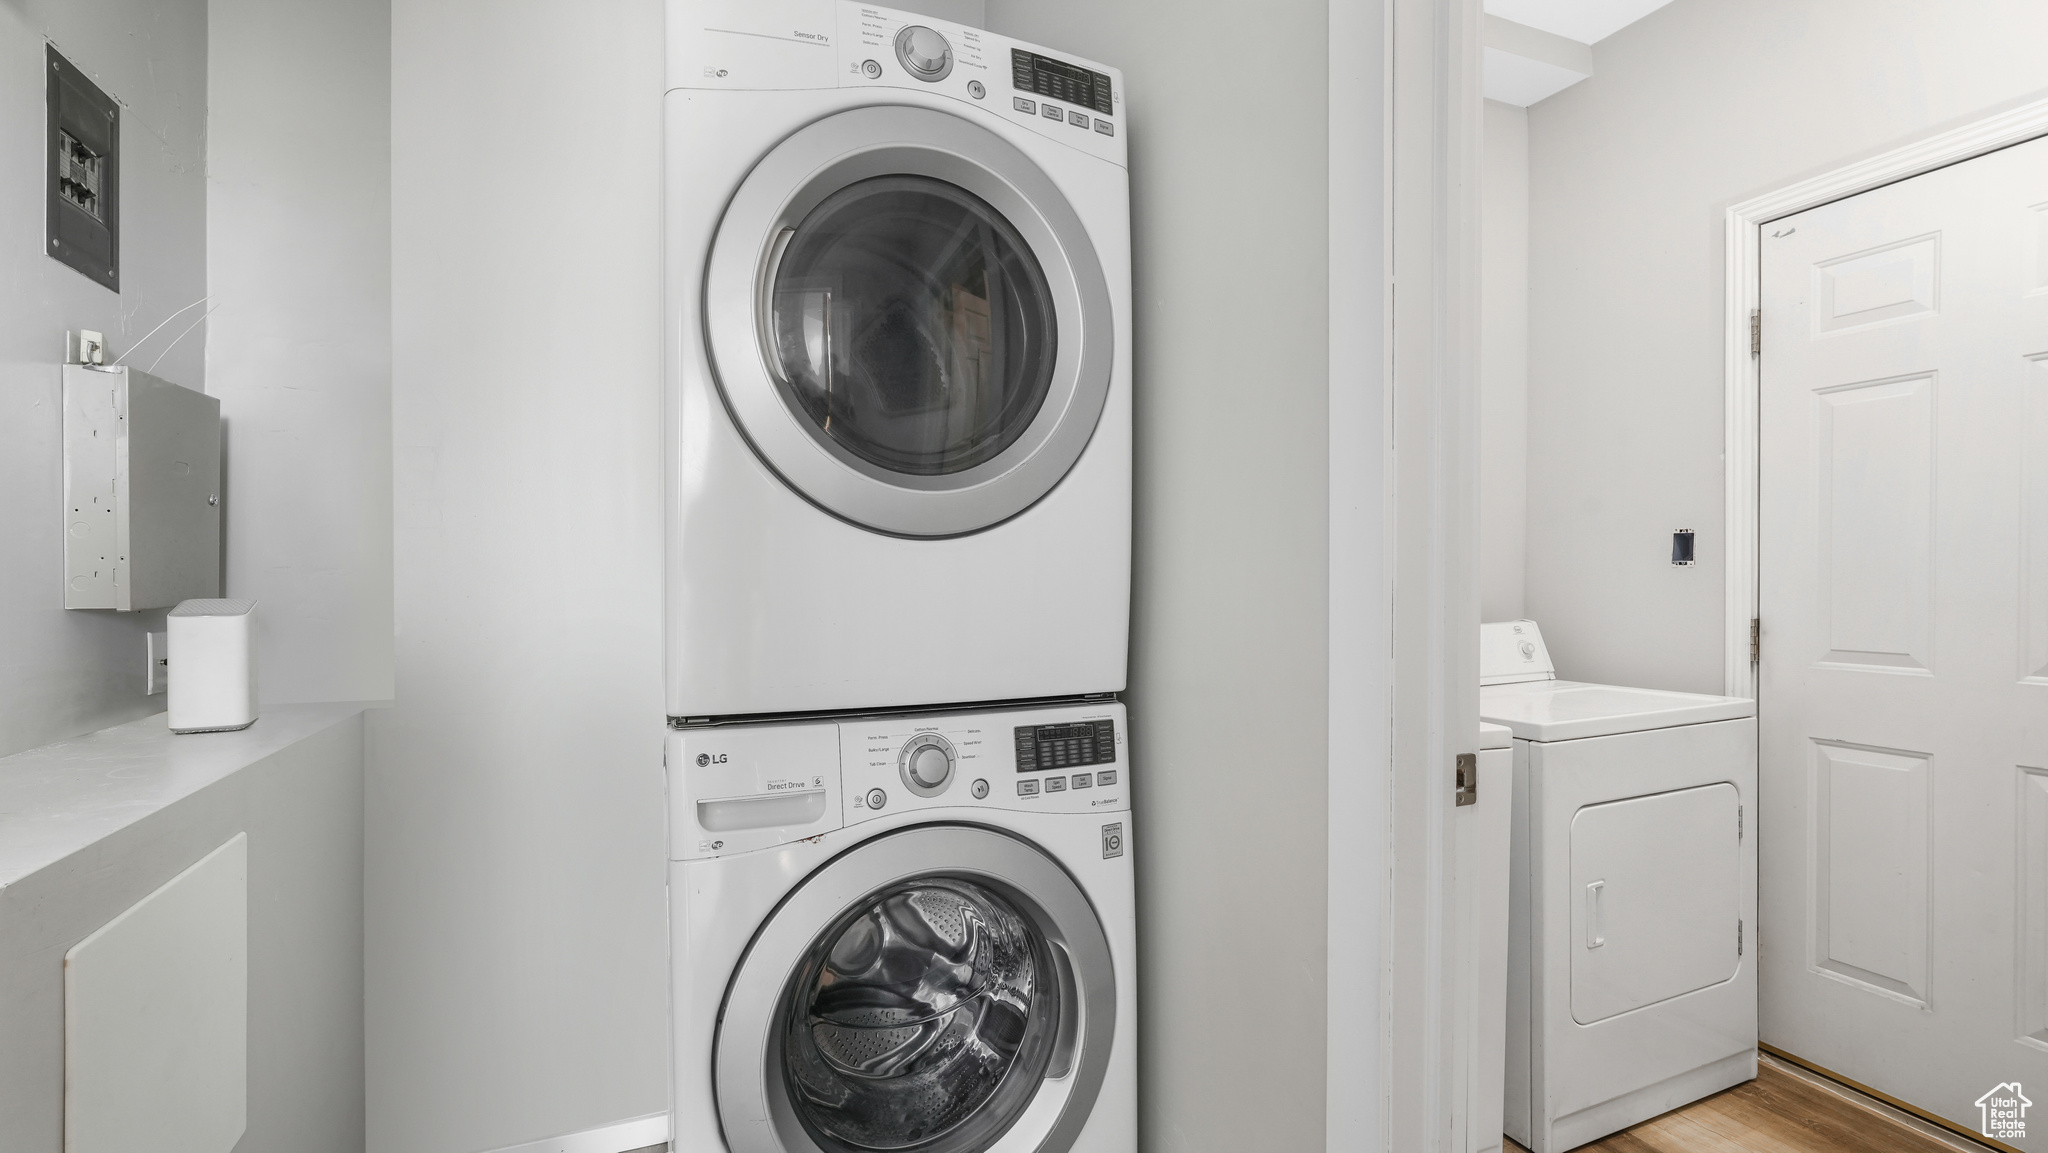 Unit one, laundry rooms for both units